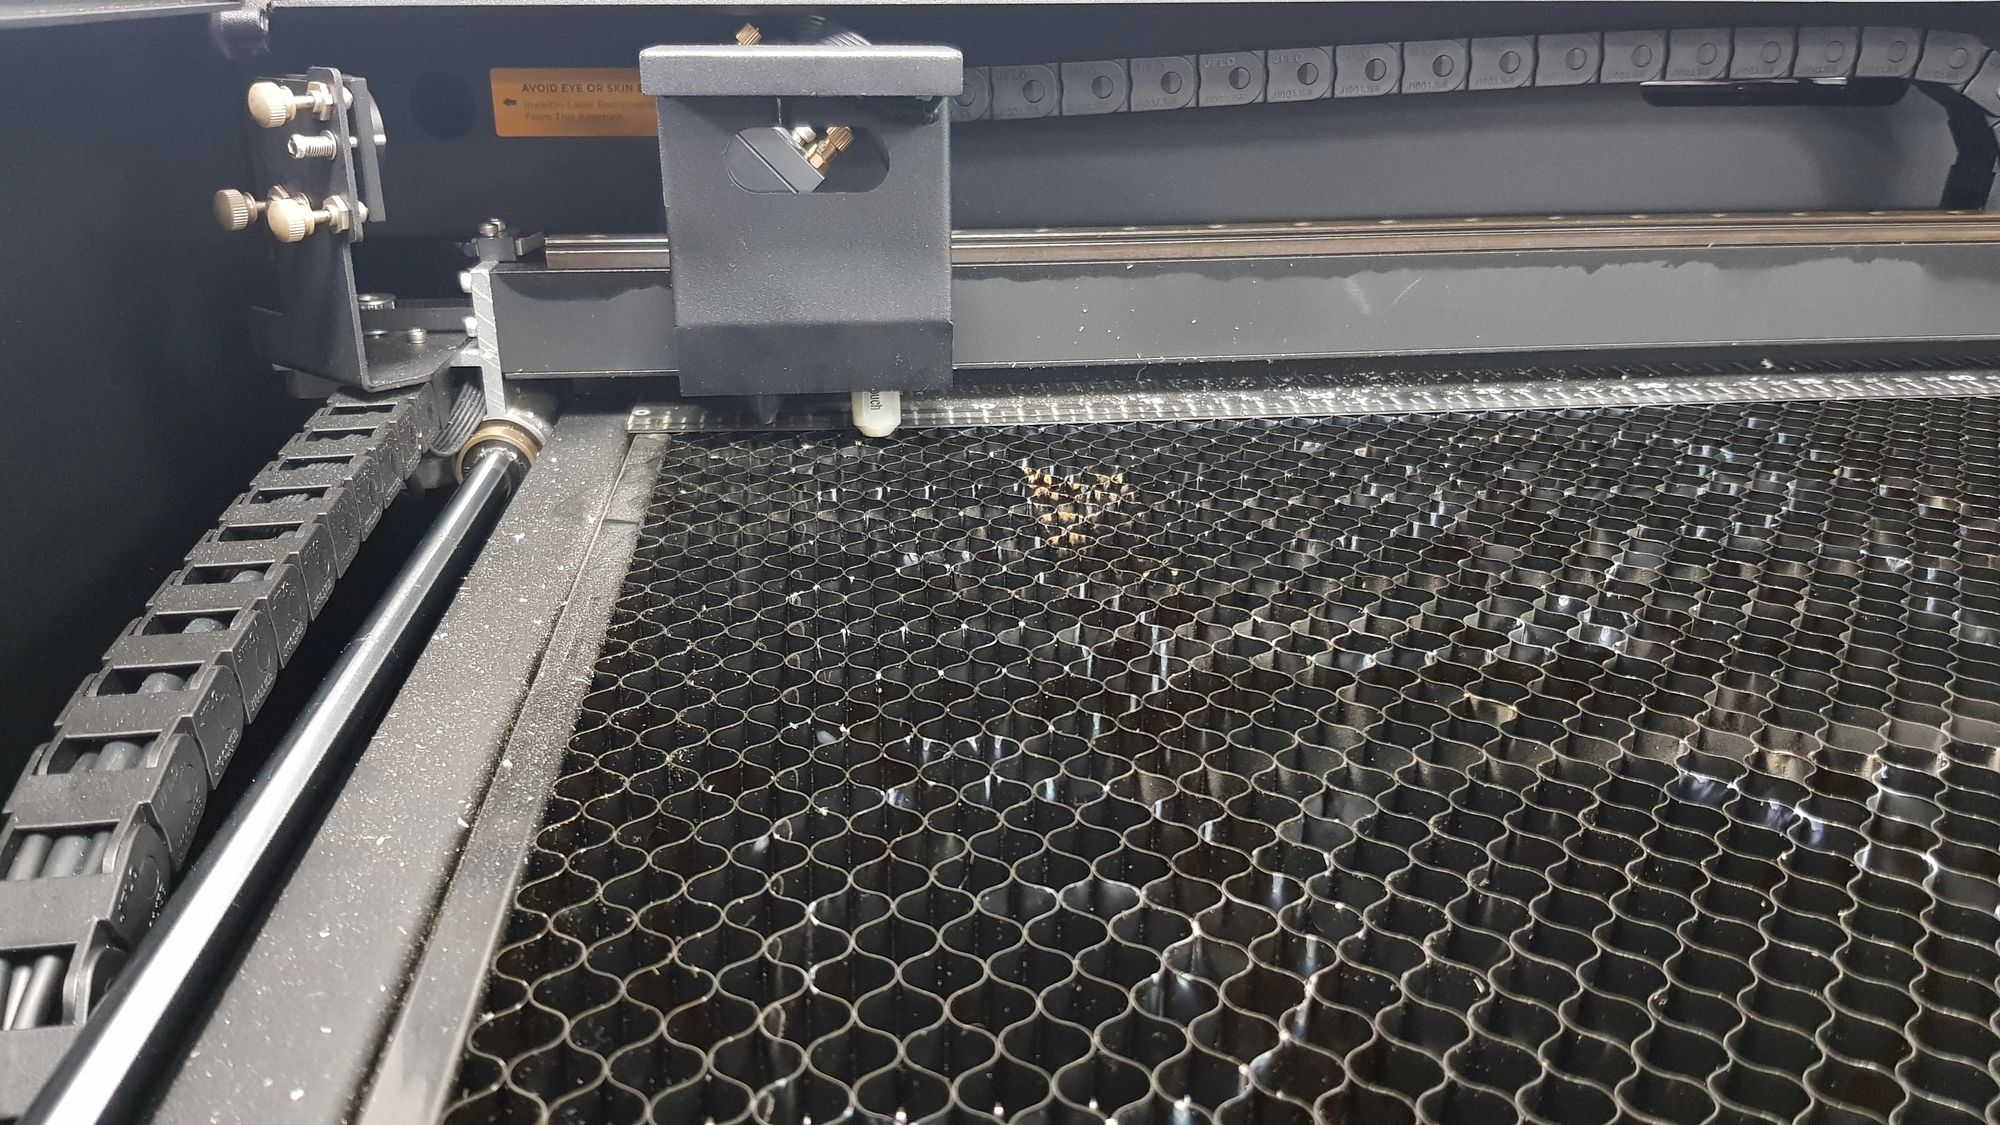 A close up of a laser cutting machine showing how it can be maintained.